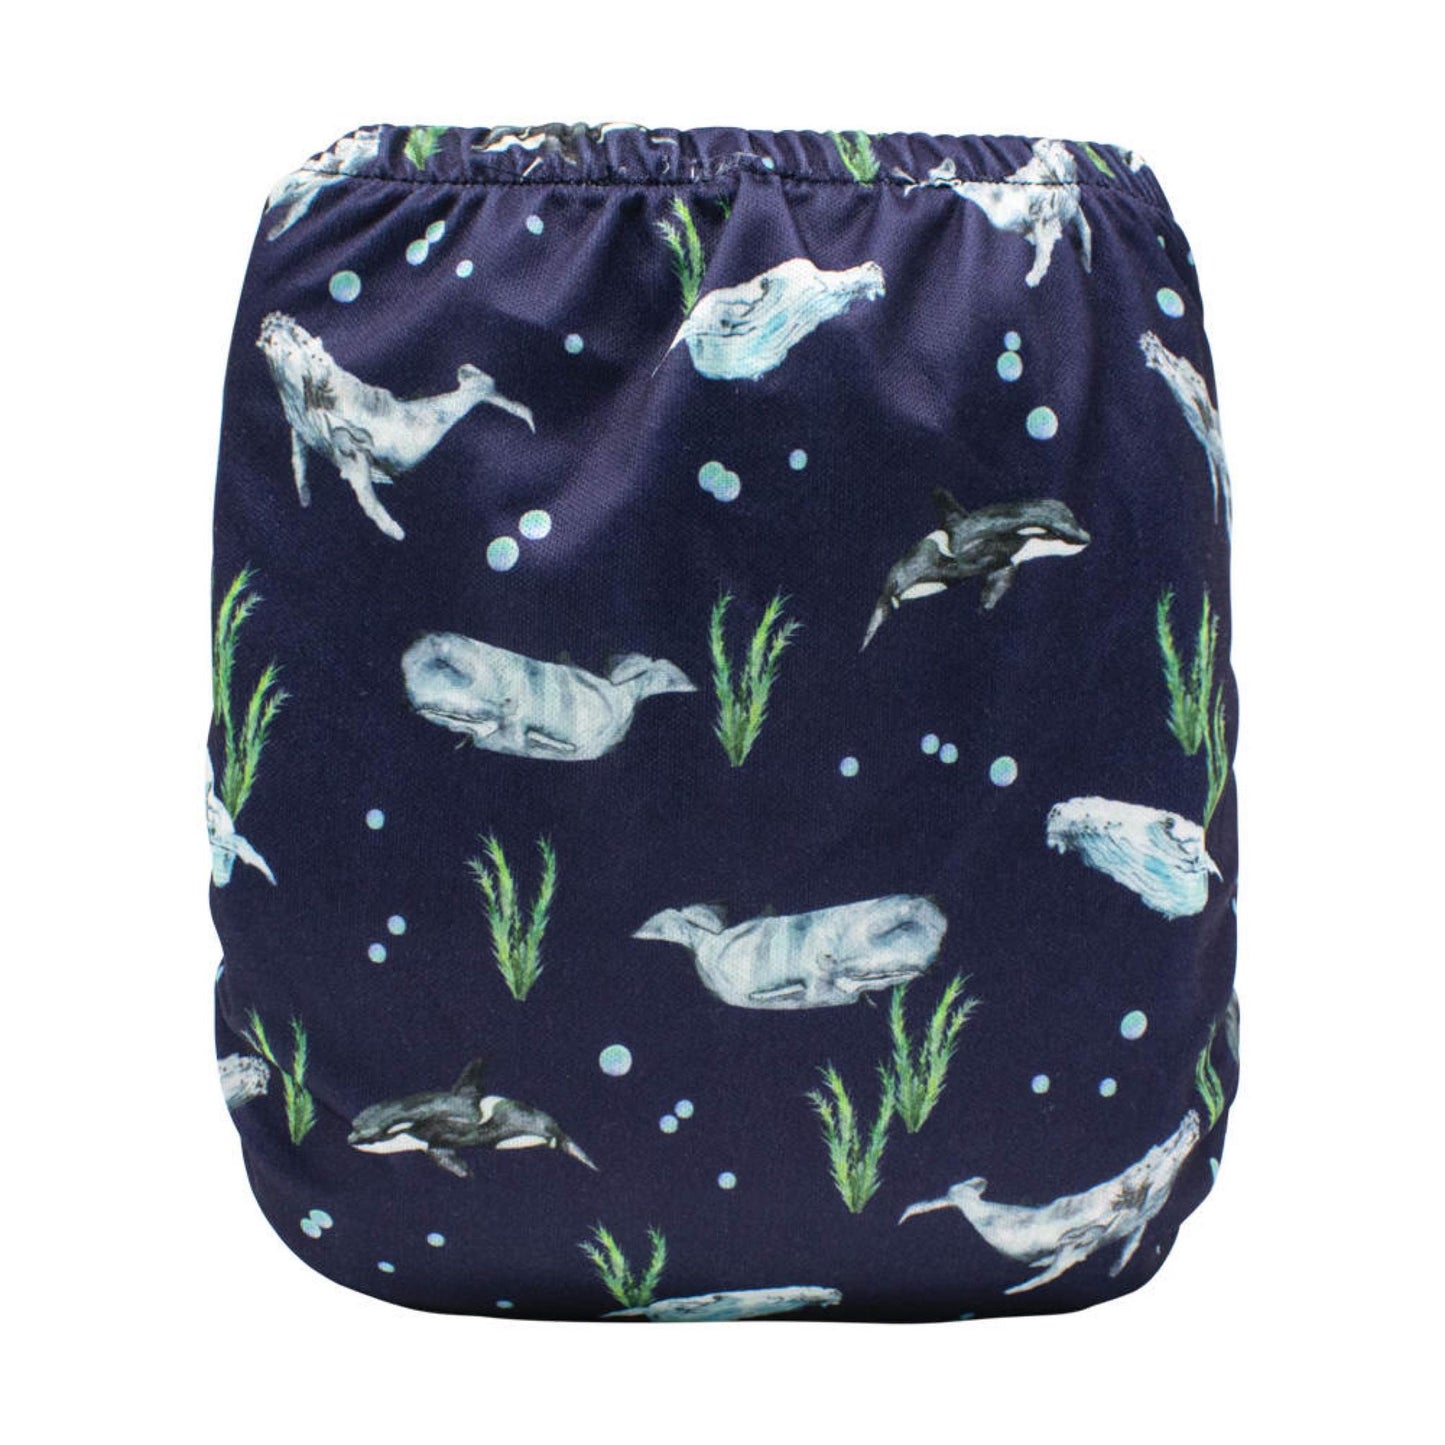 OS Pocket Diaper - Whale Watch